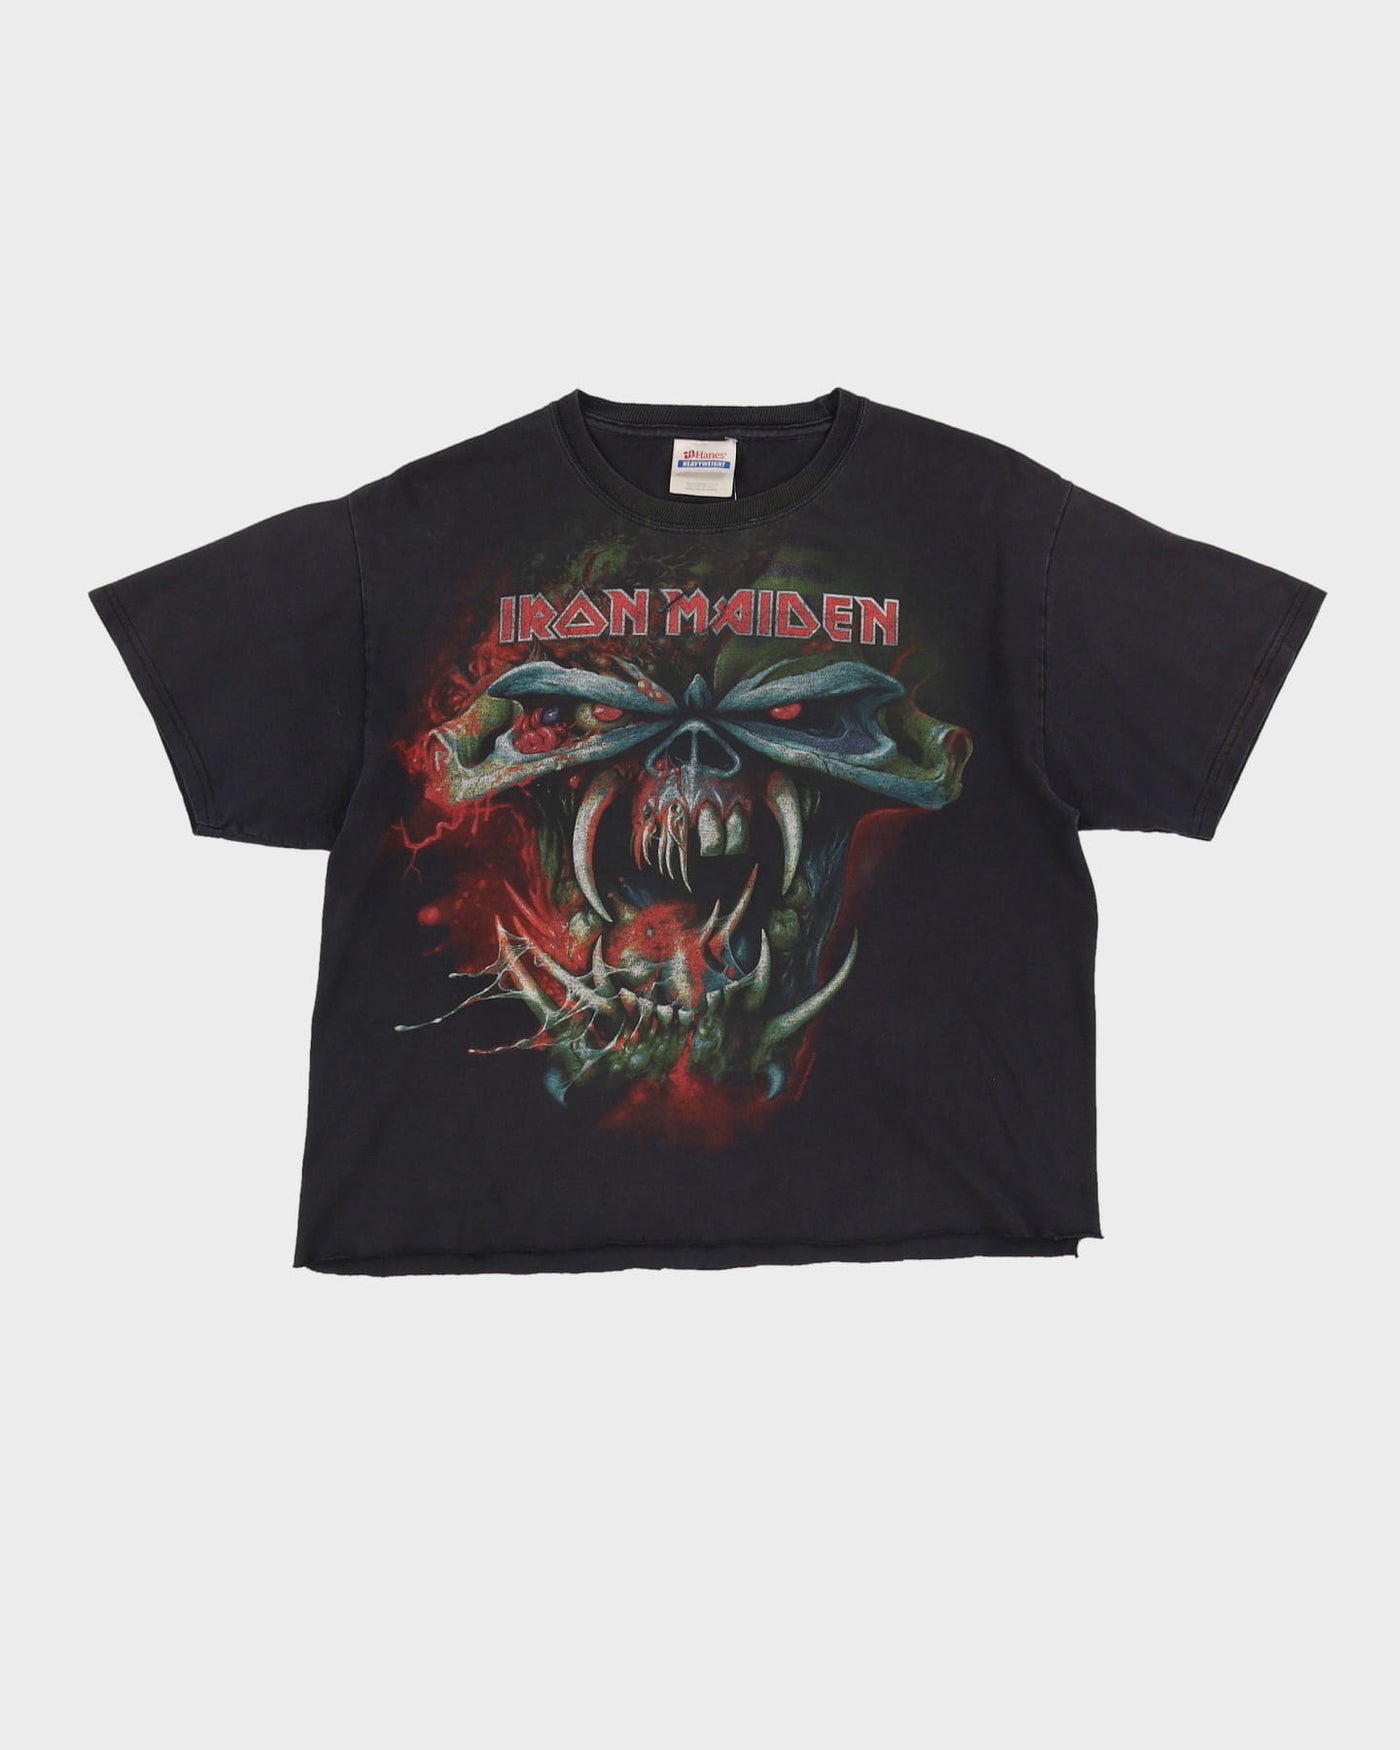 Cropped 2010 Iron Maiden The Final Frontier Black Graphic Band Tour T-Shirt - M